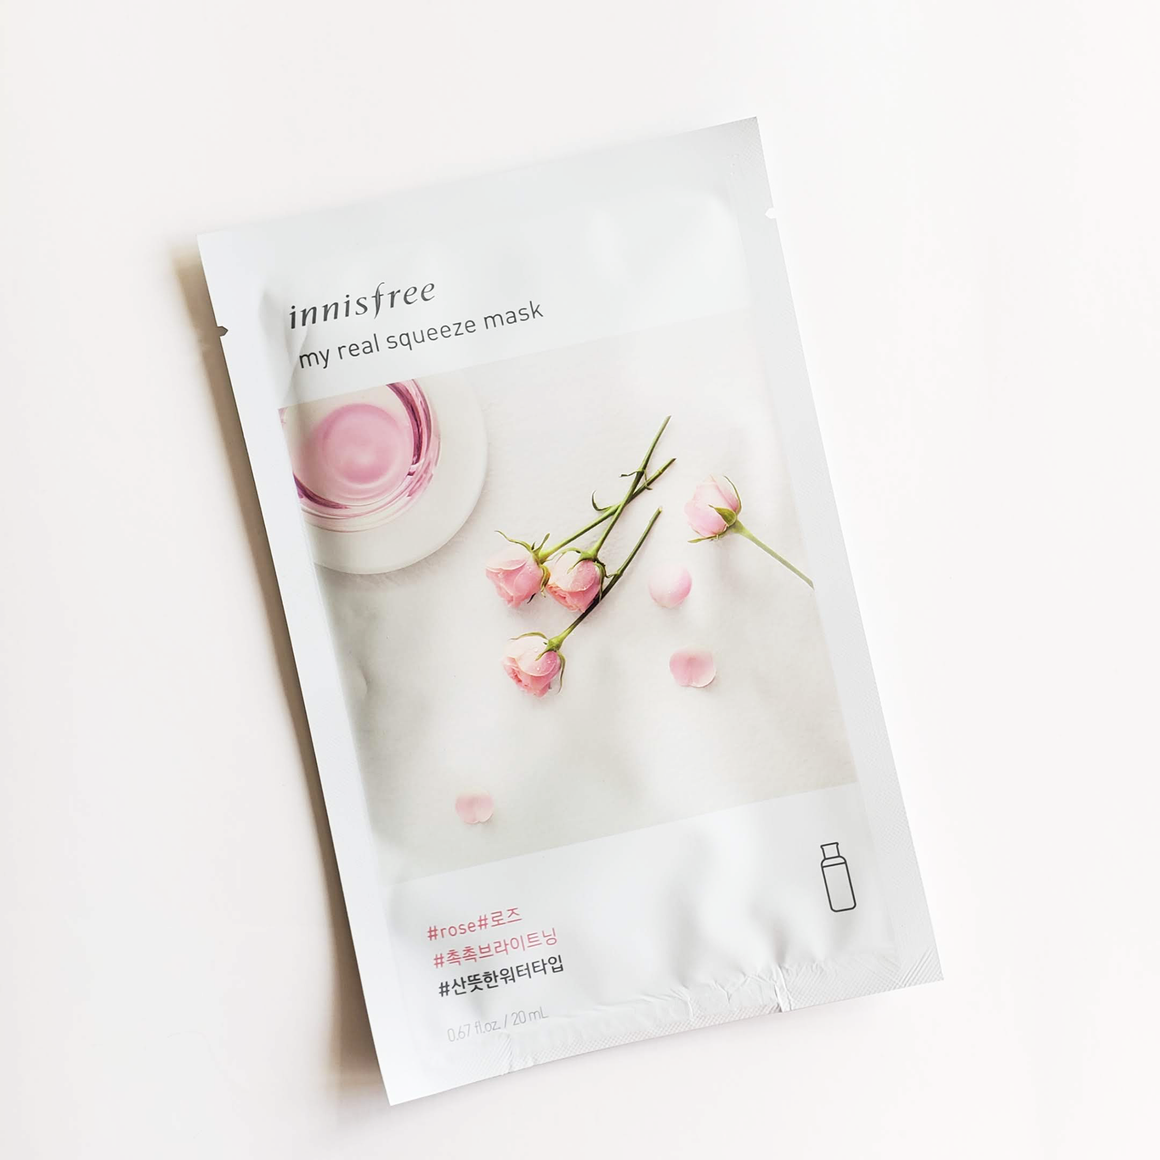 Innisfree My Real Squeeze Mask - Rose